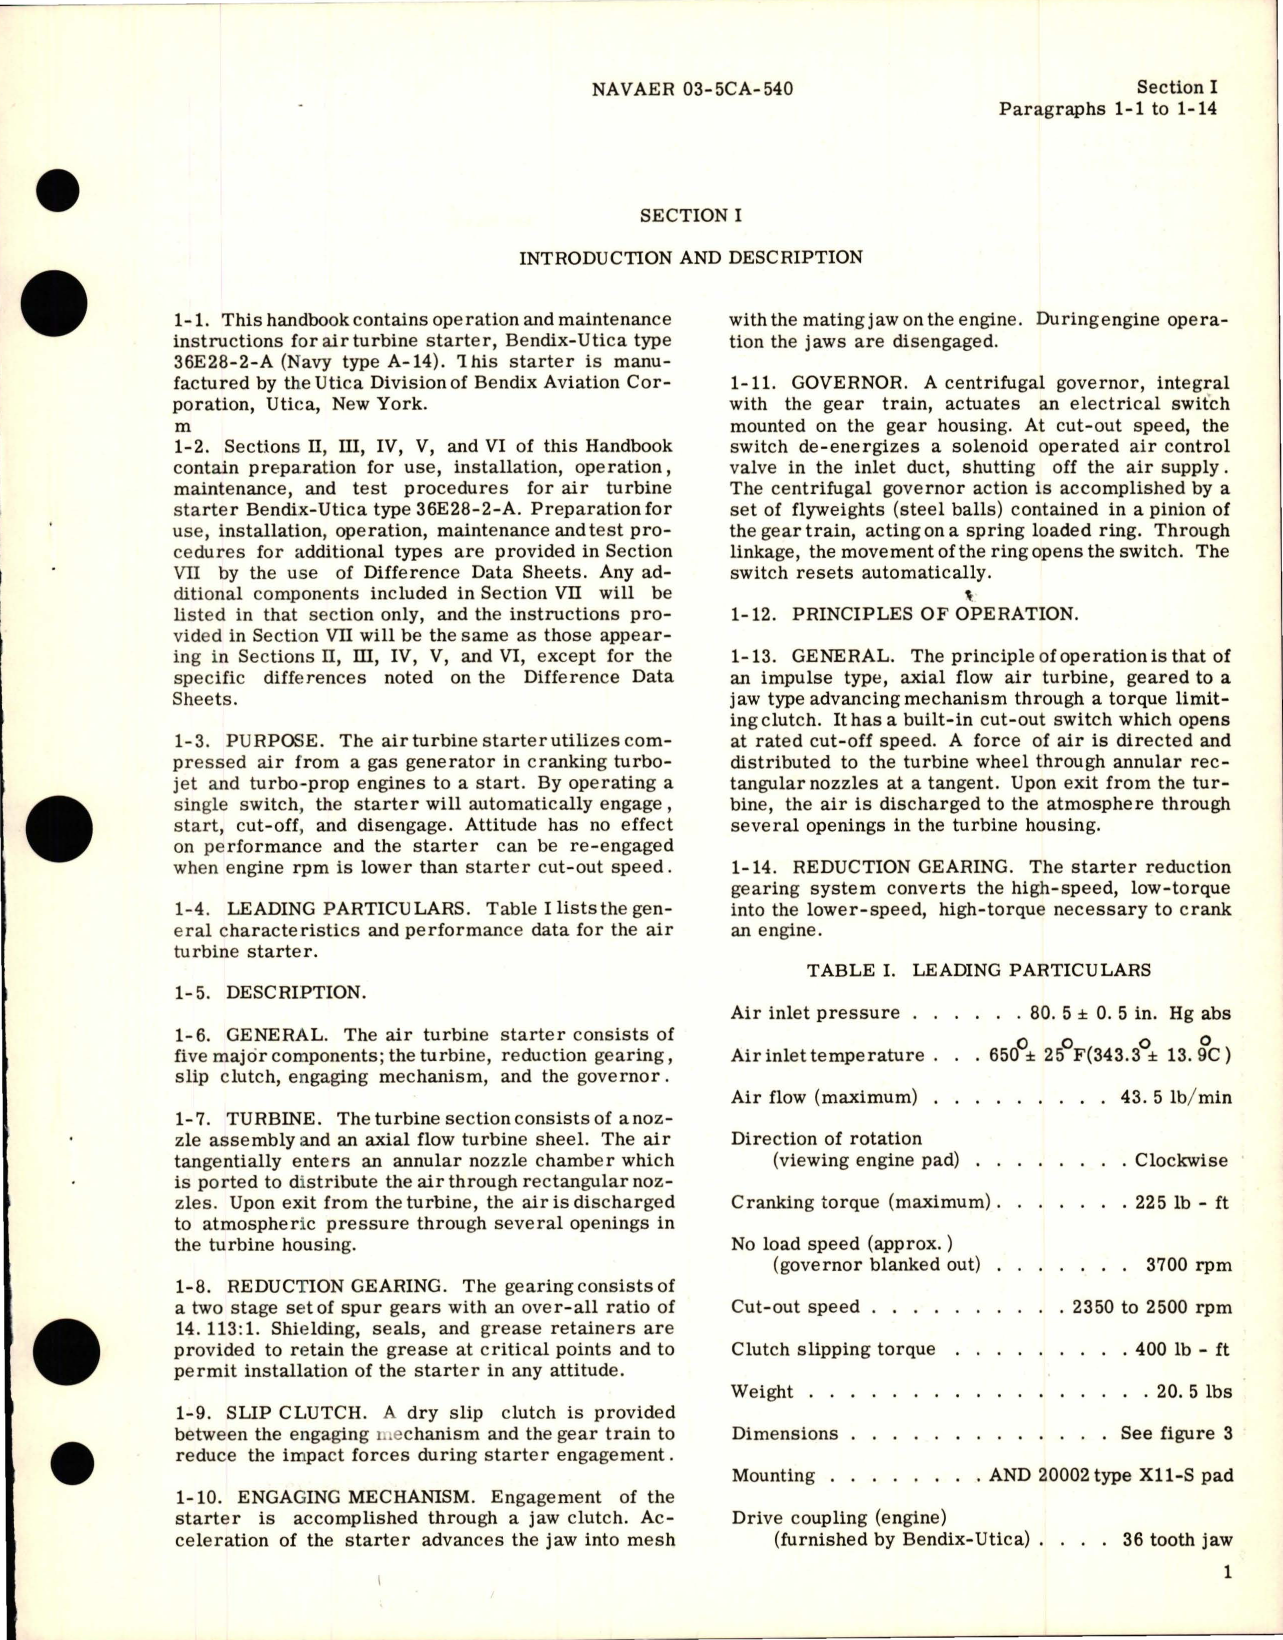 Sample page 5 from AirCorps Library document: Operation and Maintenance Instructions for Air Turbine Starter - Part 36E28